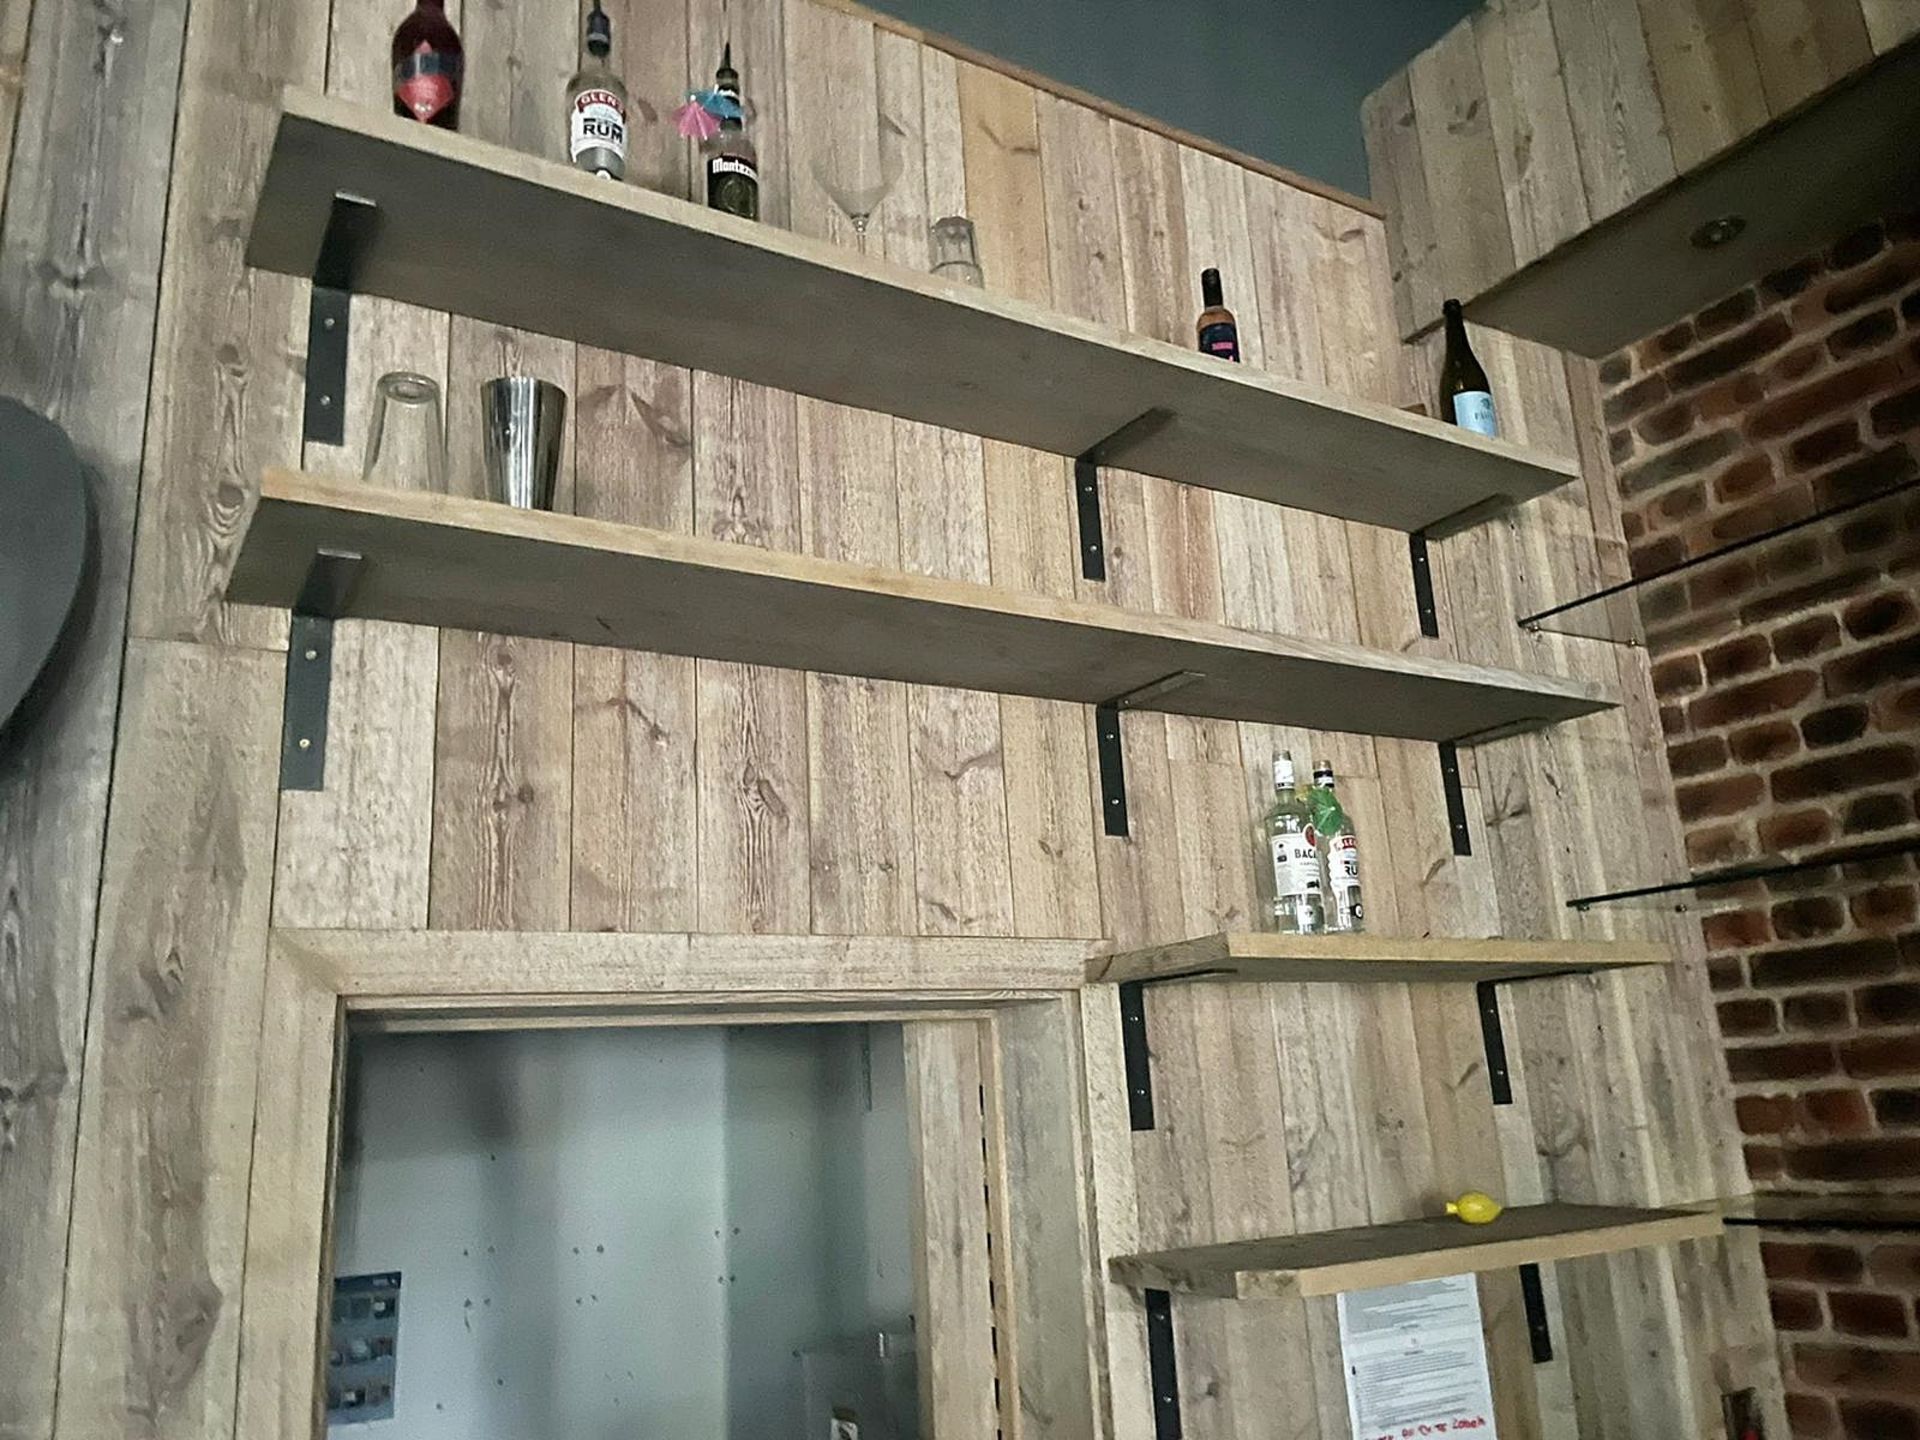 Various Collection of Backbar Shelving - Includes 4 x Wall Mounted Shelves, 7 x Glass Shelves (